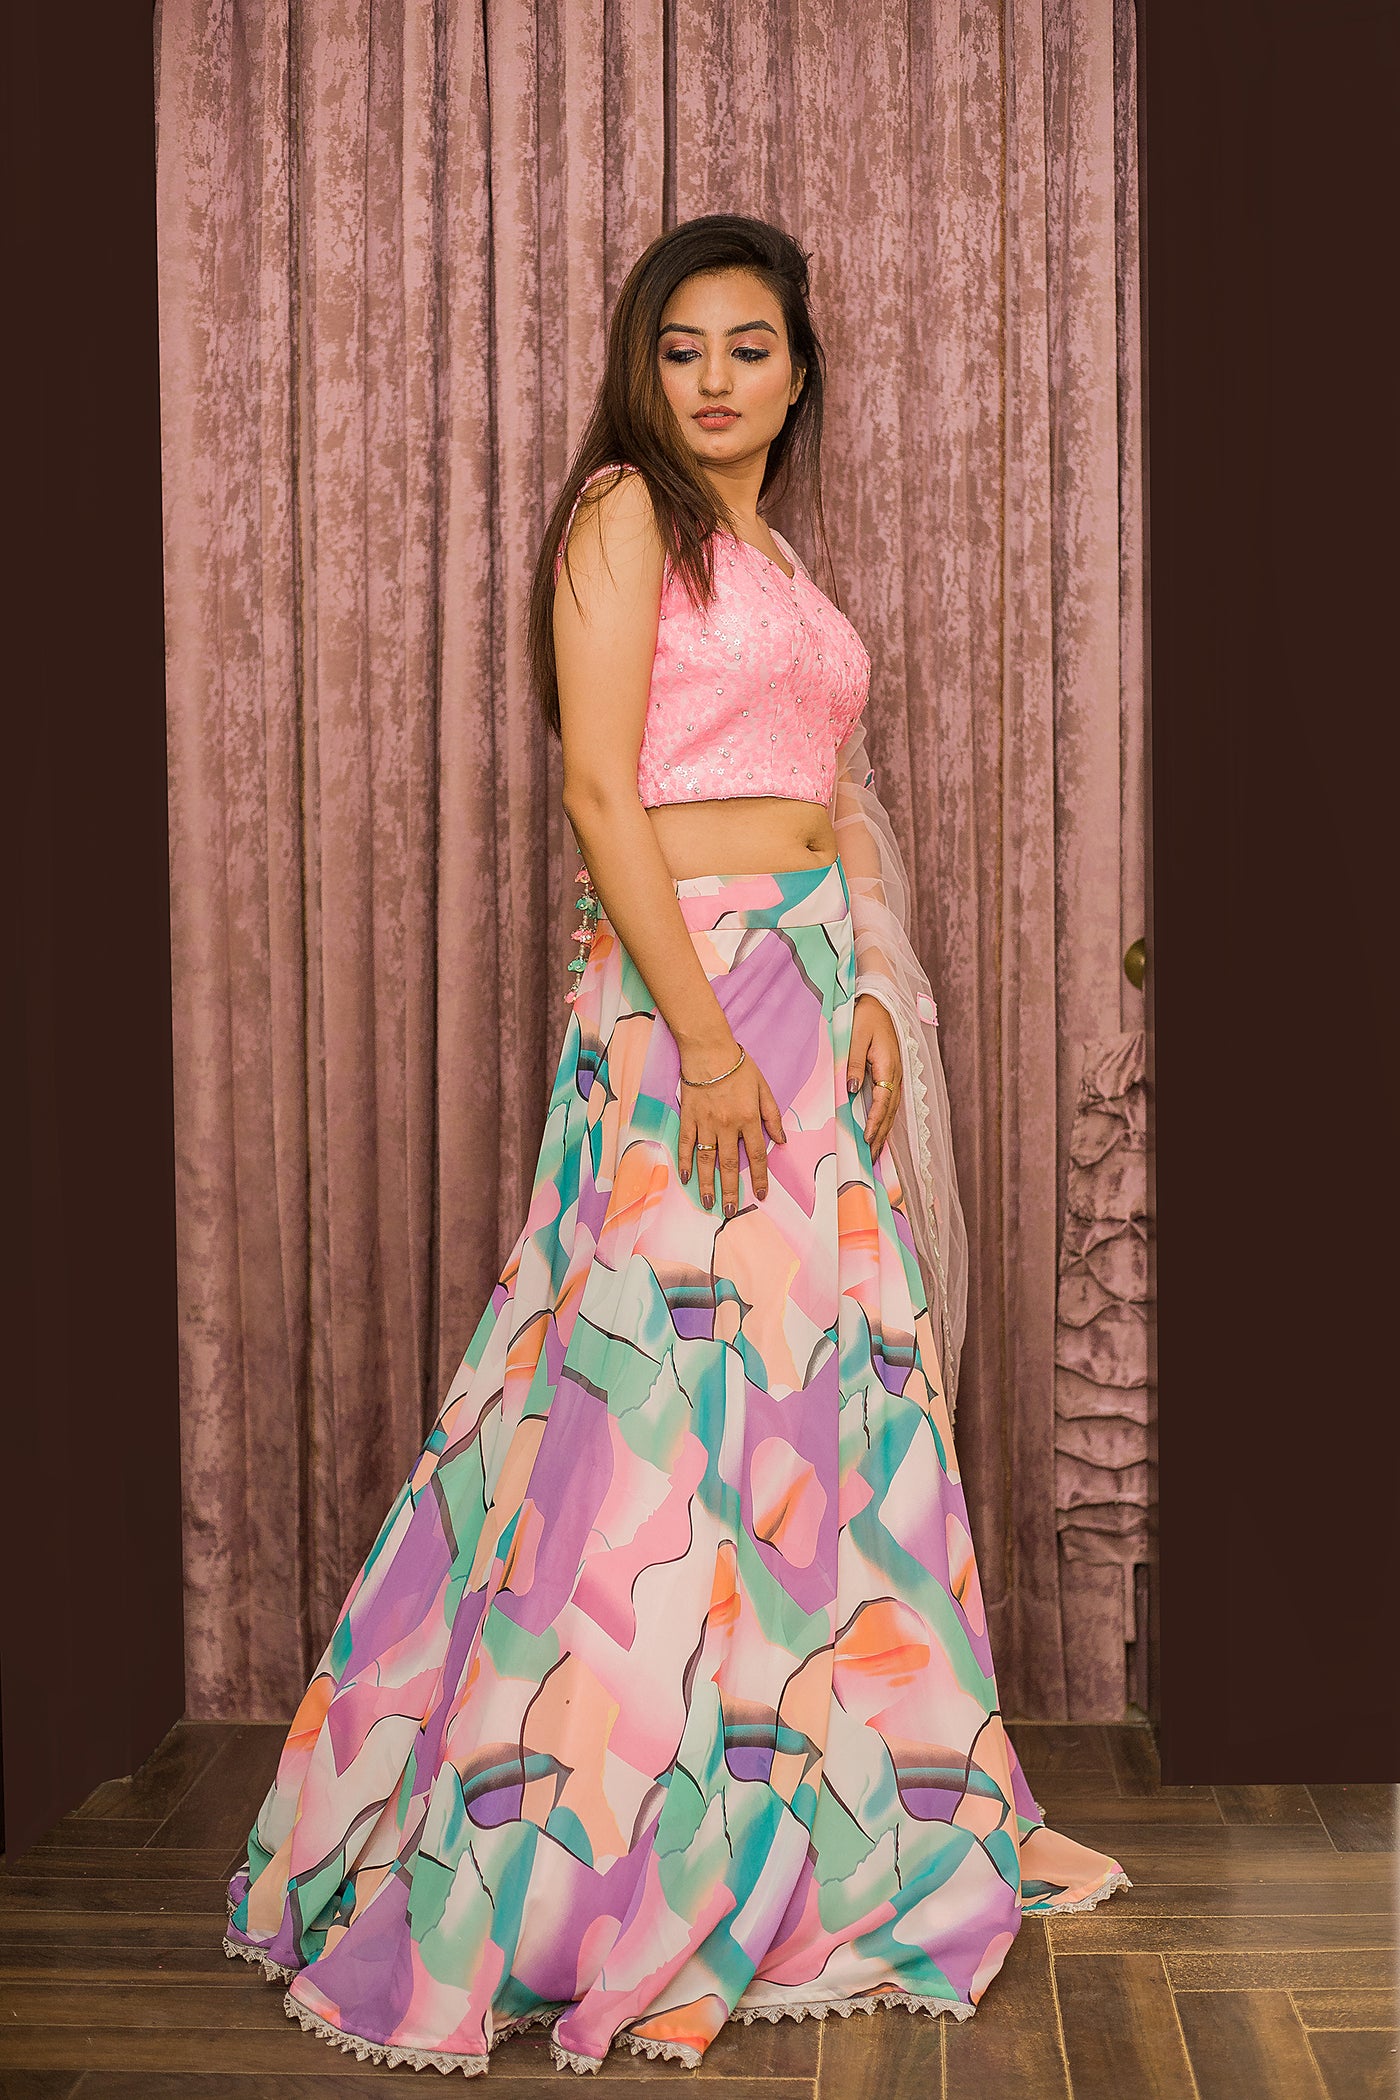 Pink Contemporary Print Lehenga Indian Clothing in Denver, CO, Aurora, CO, Boulder, CO, Fort Collins, CO, Colorado Springs, CO, Parker, CO, Highlands Ranch, CO, Cherry Creek, CO, Centennial, CO, and Longmont, CO. NATIONWIDE SHIPPING USA- India Fashion X